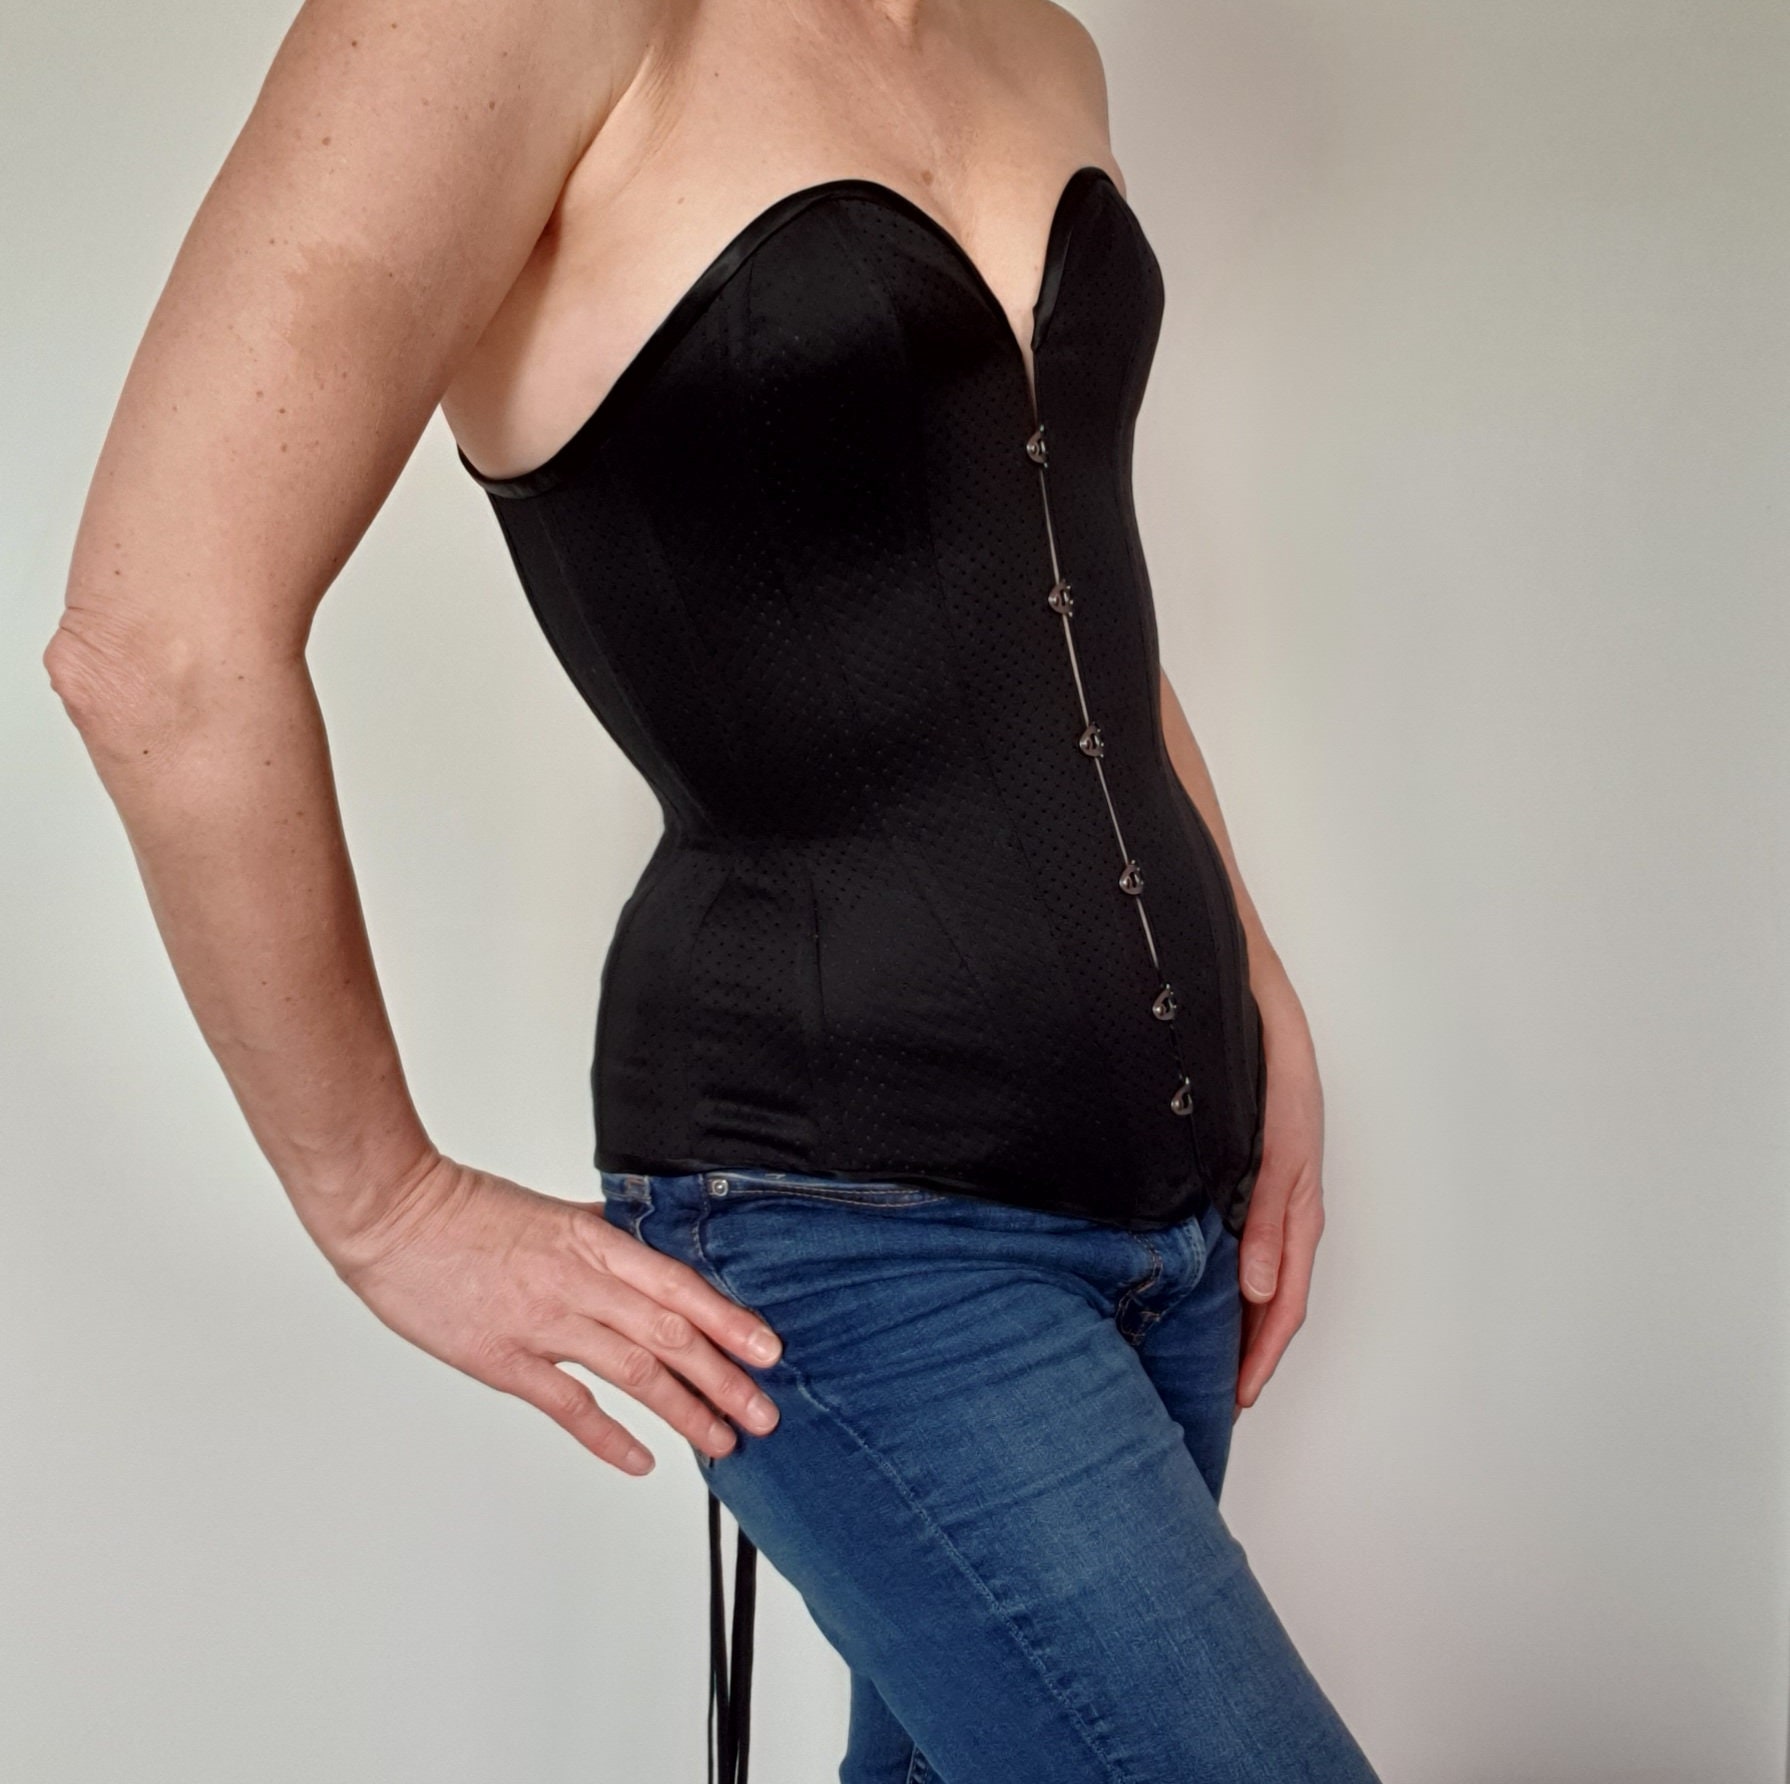 An off-the-shoulder 12 panelled over-bust corset pattern size (UK) 8-24,  (US) 4-20 with 4 bust size variations